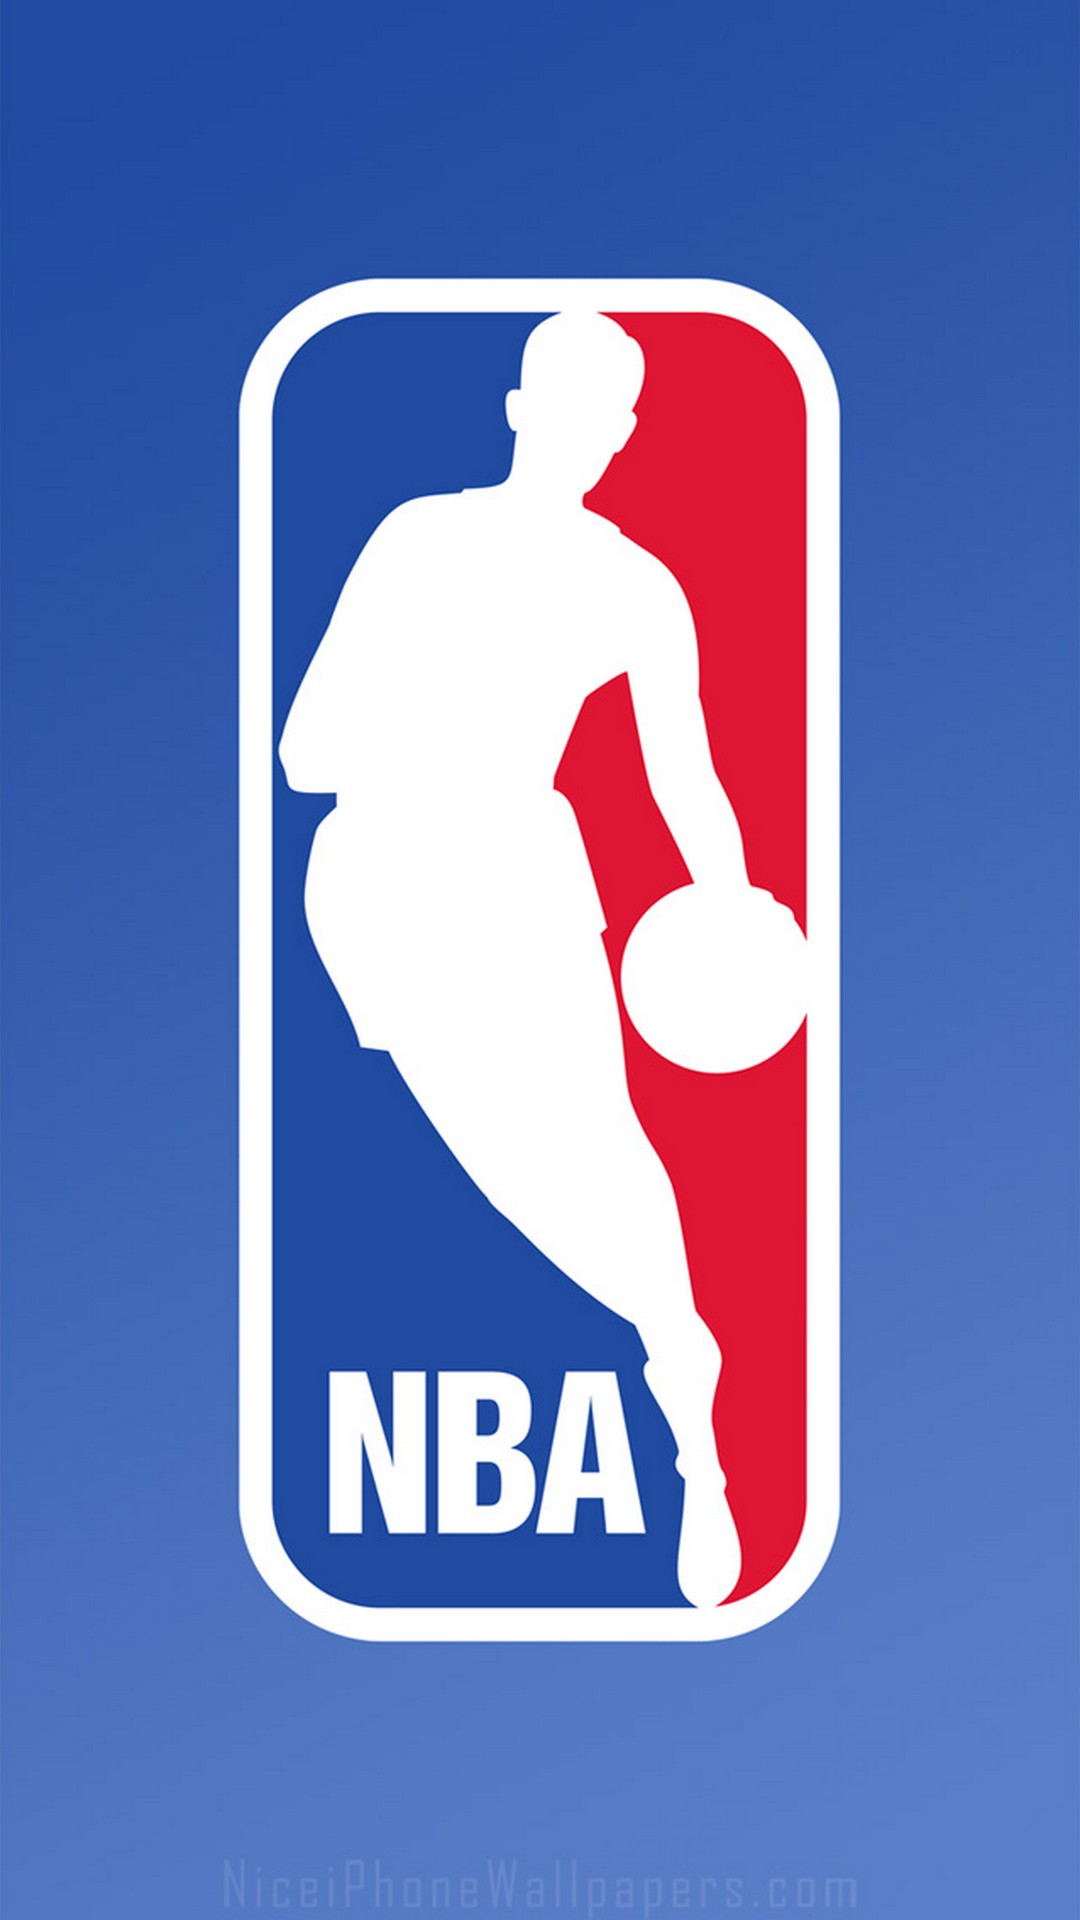 NBA Mobile Wallpaper HD with image dimensions 1080x1920 pixel. You can make this wallpaper for your Desktop Computer Backgrounds, Windows or Mac Screensavers, iPhone Lock screen, Tablet or Android and another Mobile Phone device